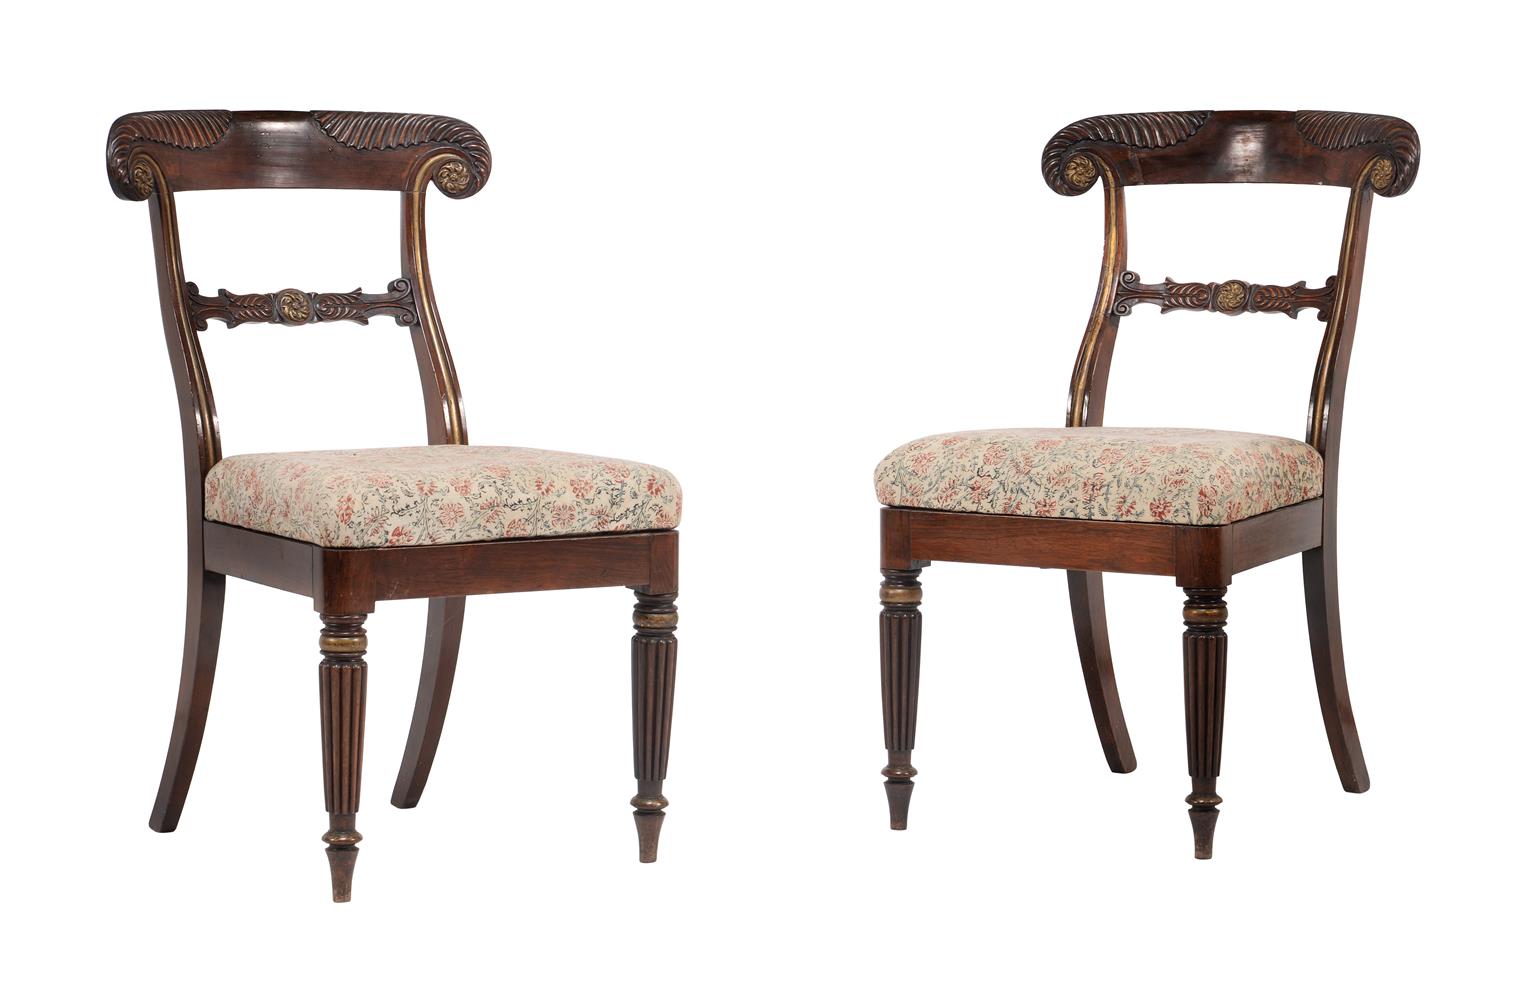 A PAIR OF GEORGE IV MAHOGANY AND PARCEL GILT SIDE CHAIRS